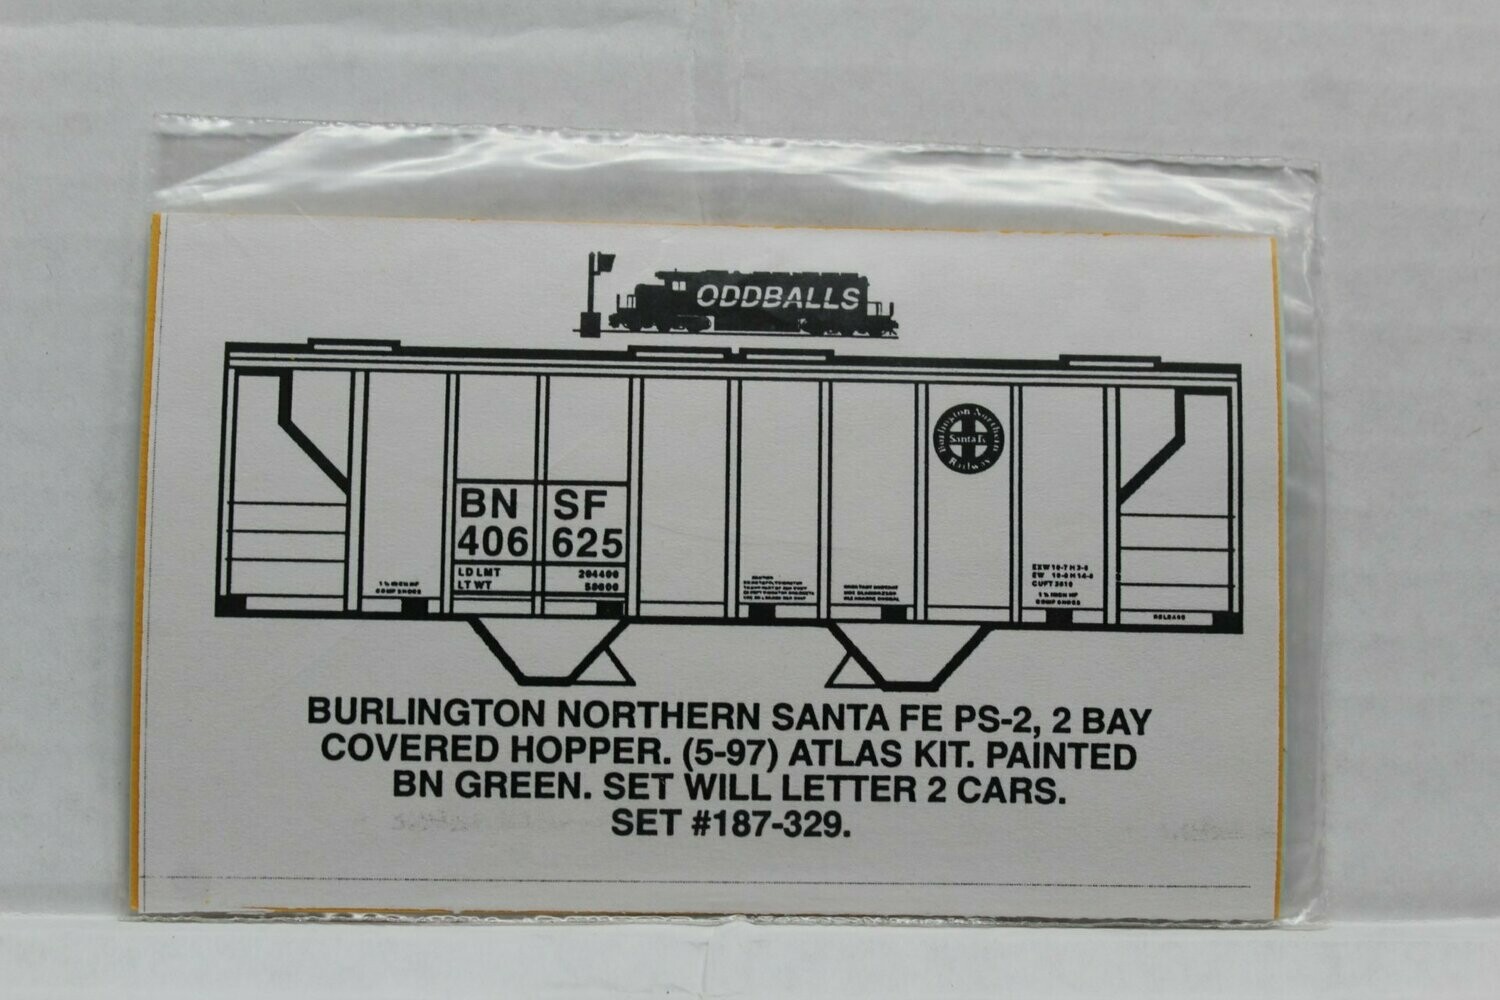 BNSF PS-2 2 Bay Covered Hopper Decal set Will letter 2 cars ODDBALLS